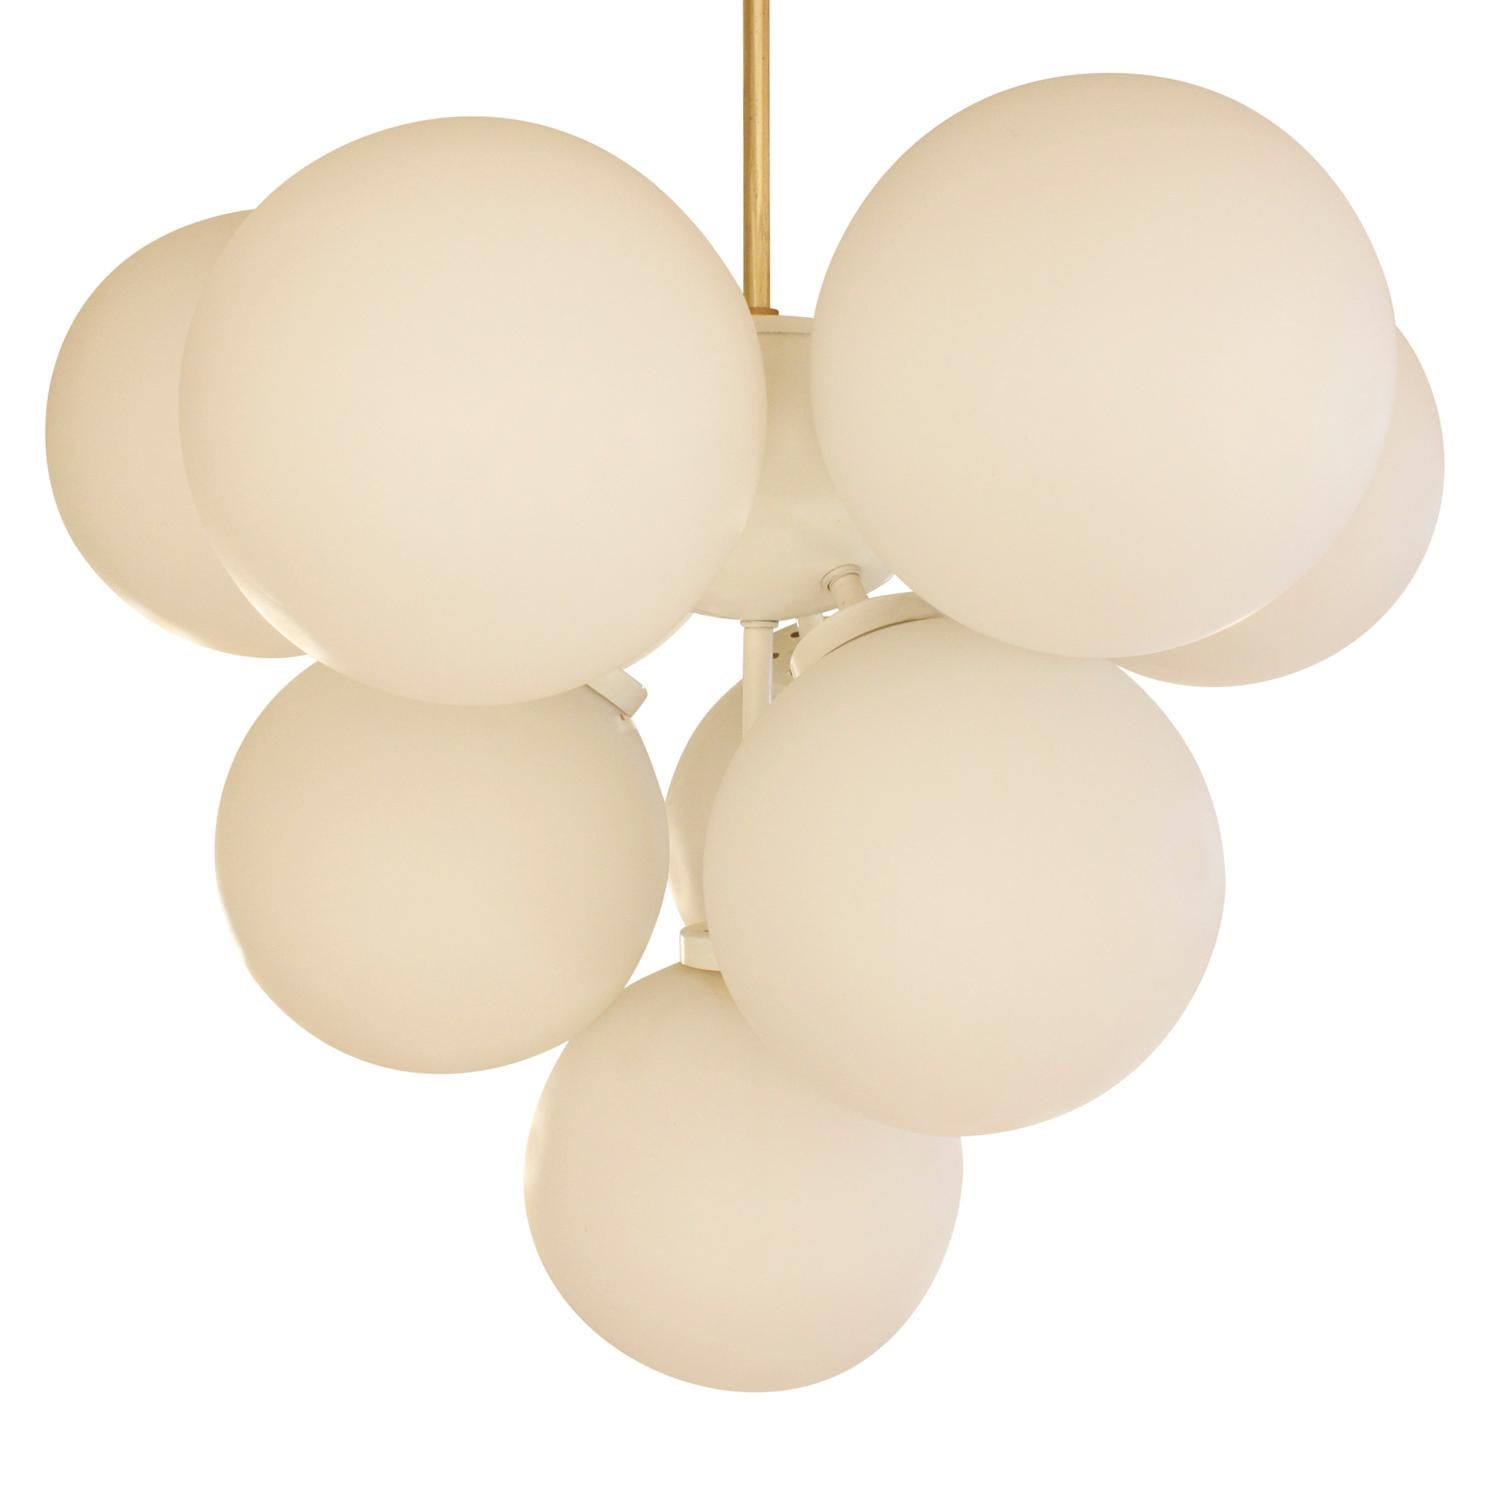 German Sculptural Chandelier in Brass with White Glass Globes, 1960s